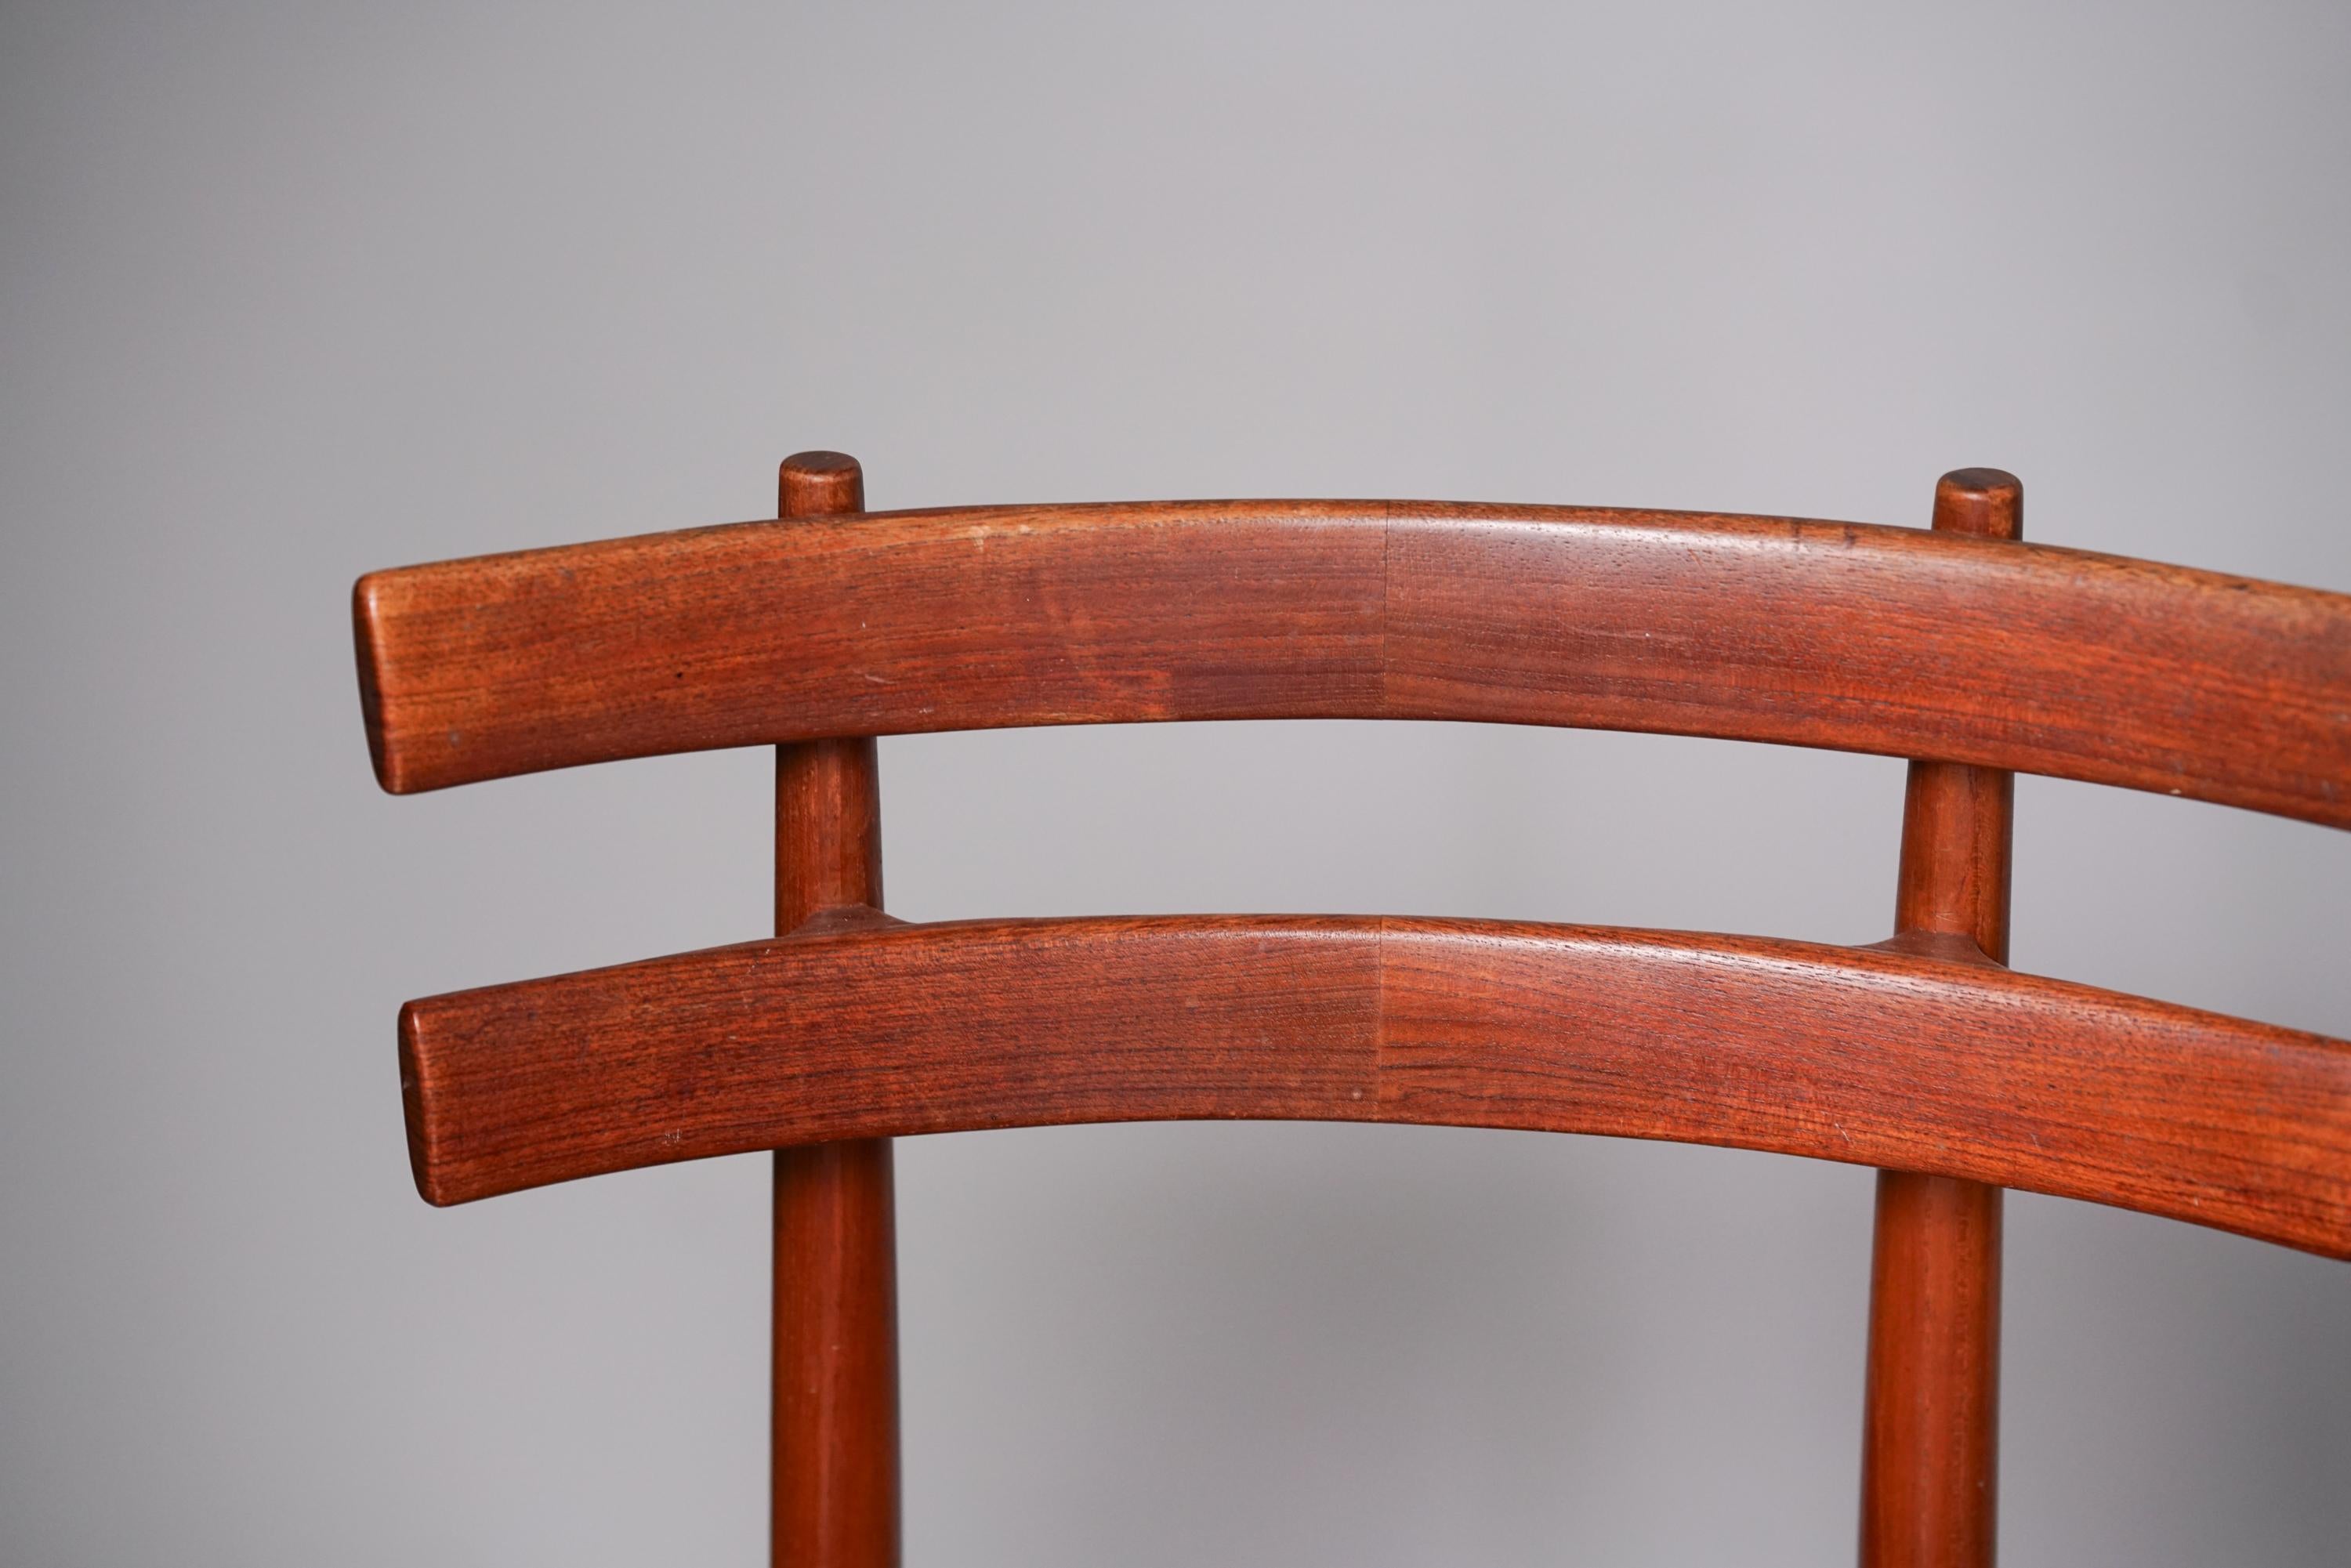 Leather Set of Four Teak Chairs, Poul Hundevad, 1960s For Sale